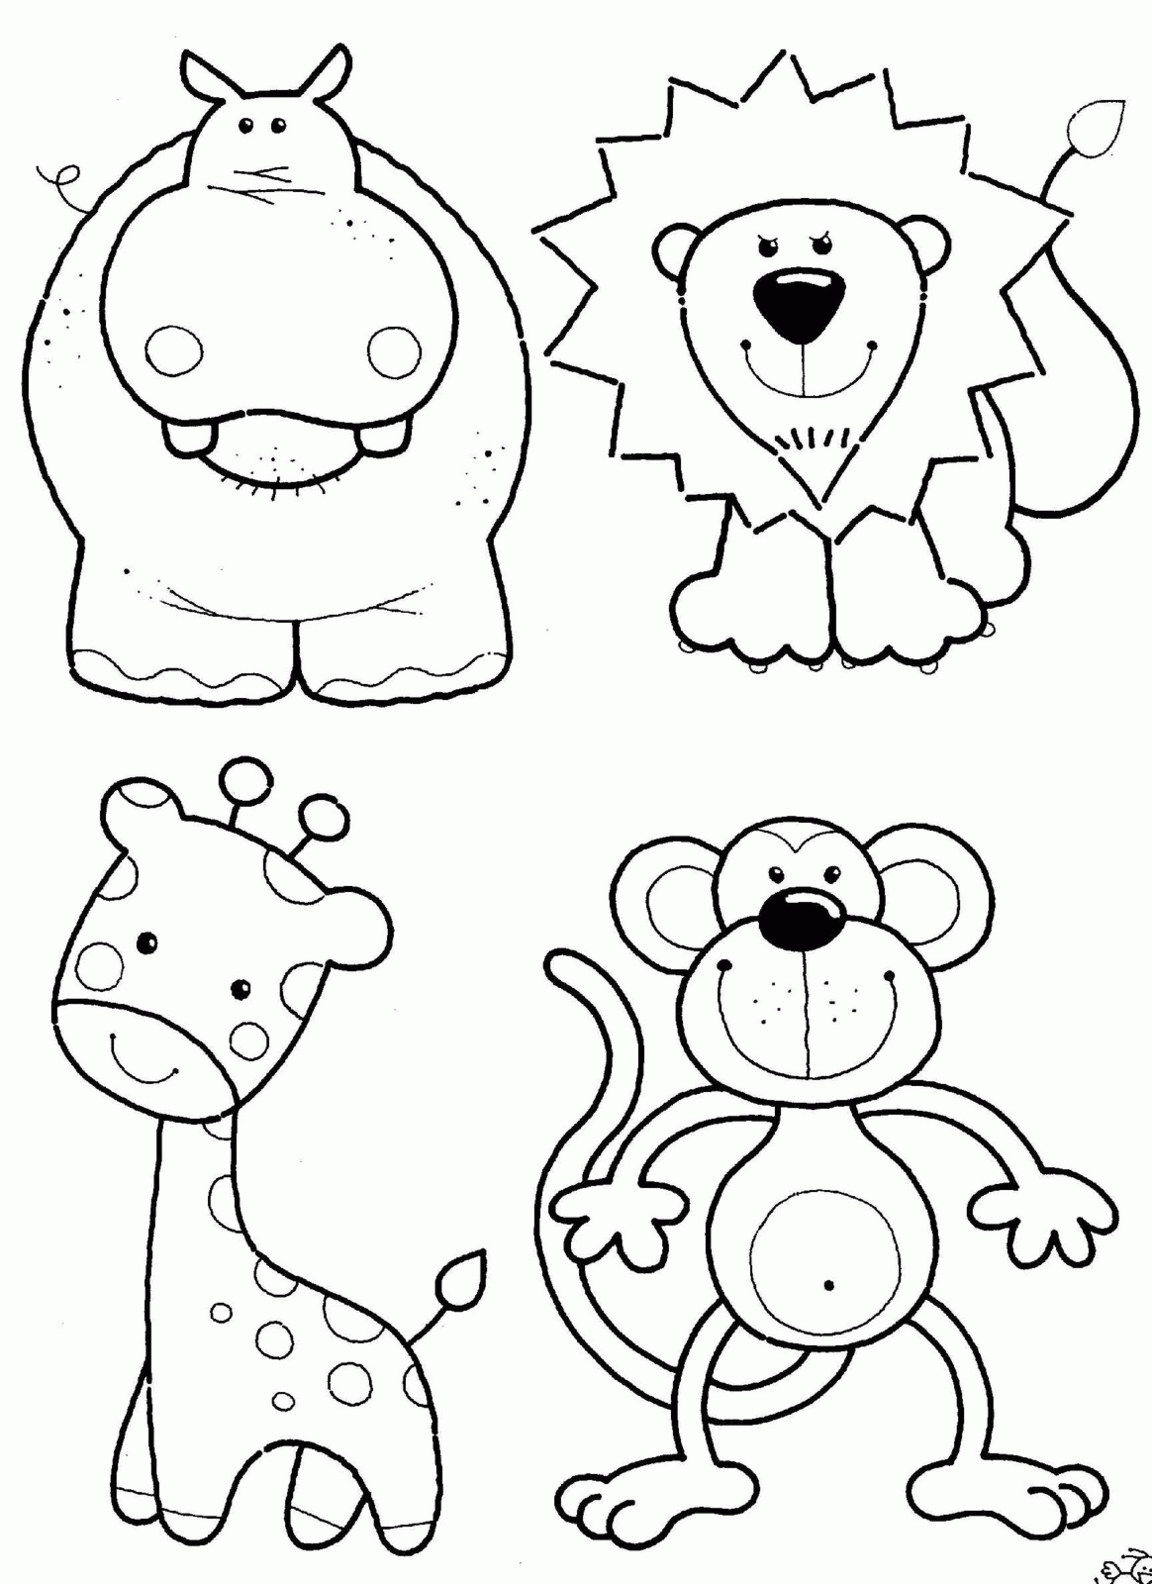 Coloring Pictures Printable Animals   High Quality Coloring Pages ...